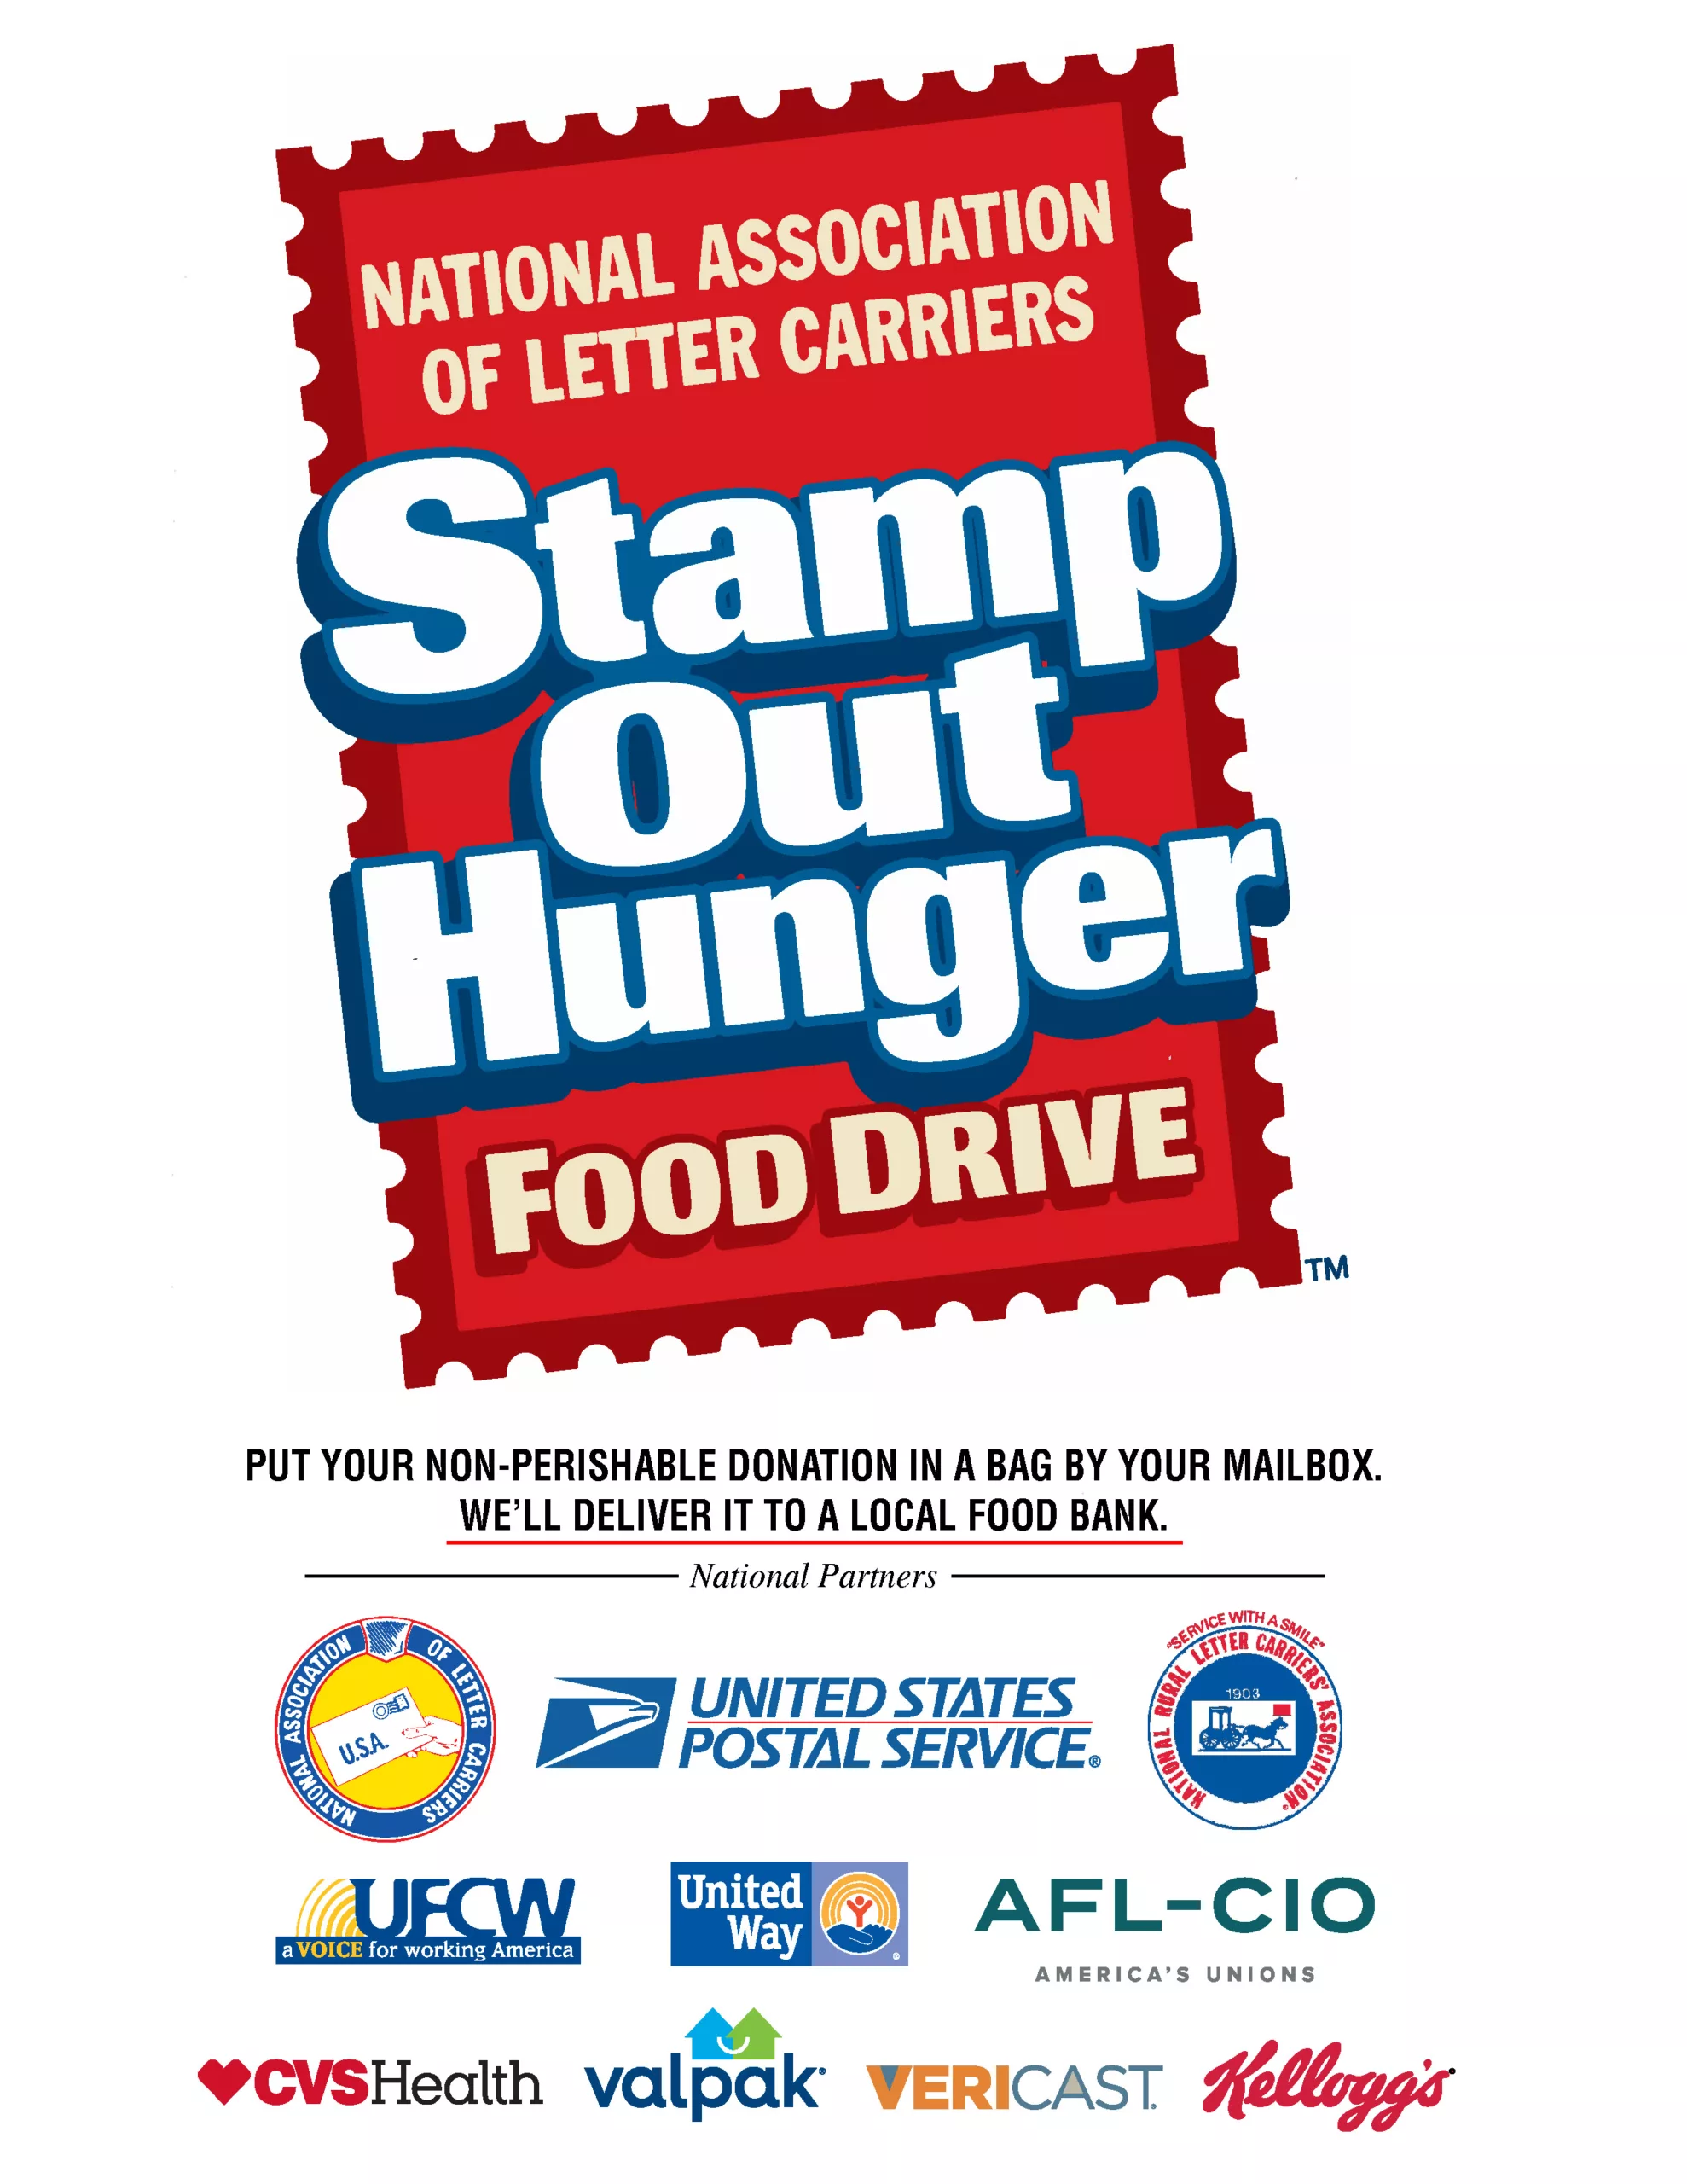 Stamp Out Hunger Food Drive Returns on Saturday, May 13